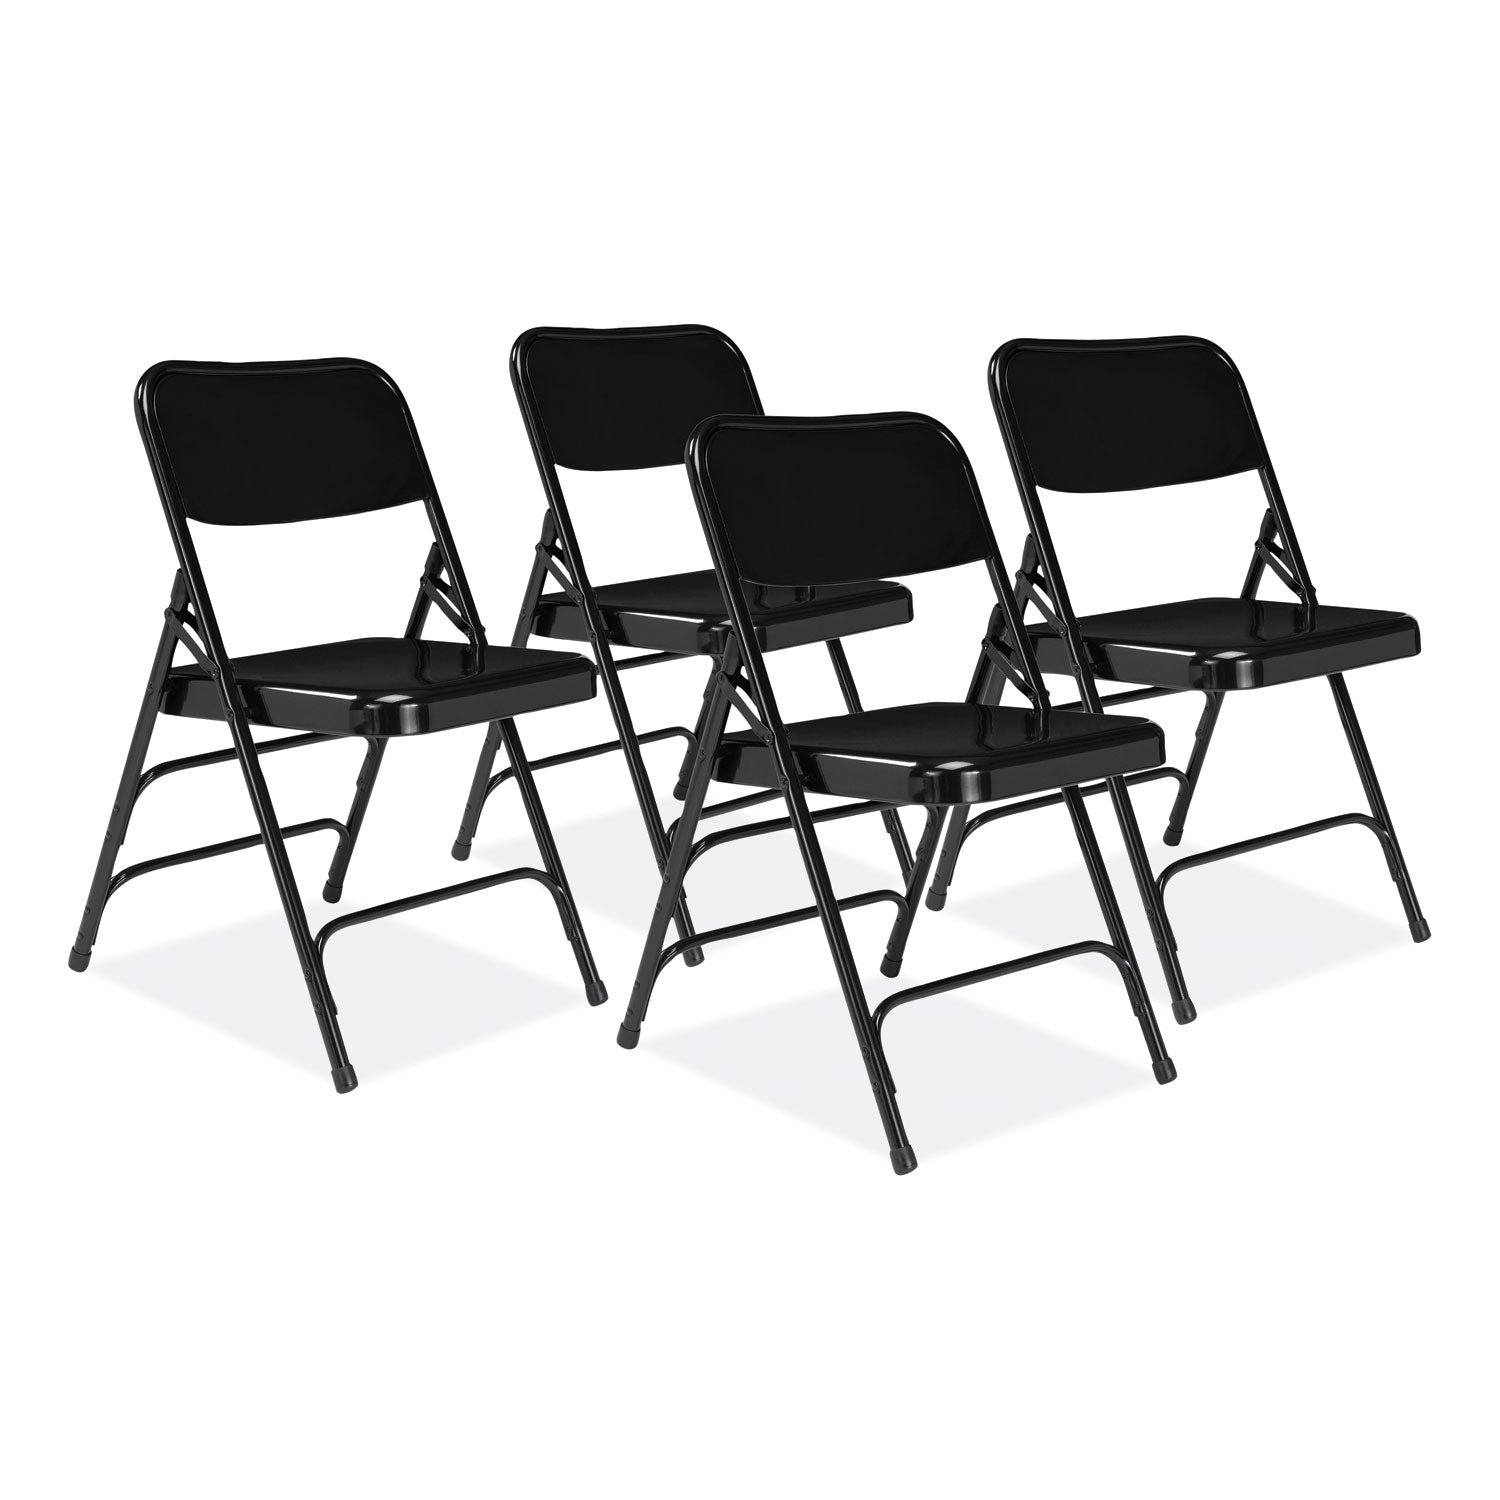 300-series-deluxe-all-steel-triple-brace-folding-chair-supports-480-lb-1725-seat-ht-black-4-ct-ships-in-1-3-bus-days_nps310 - 1